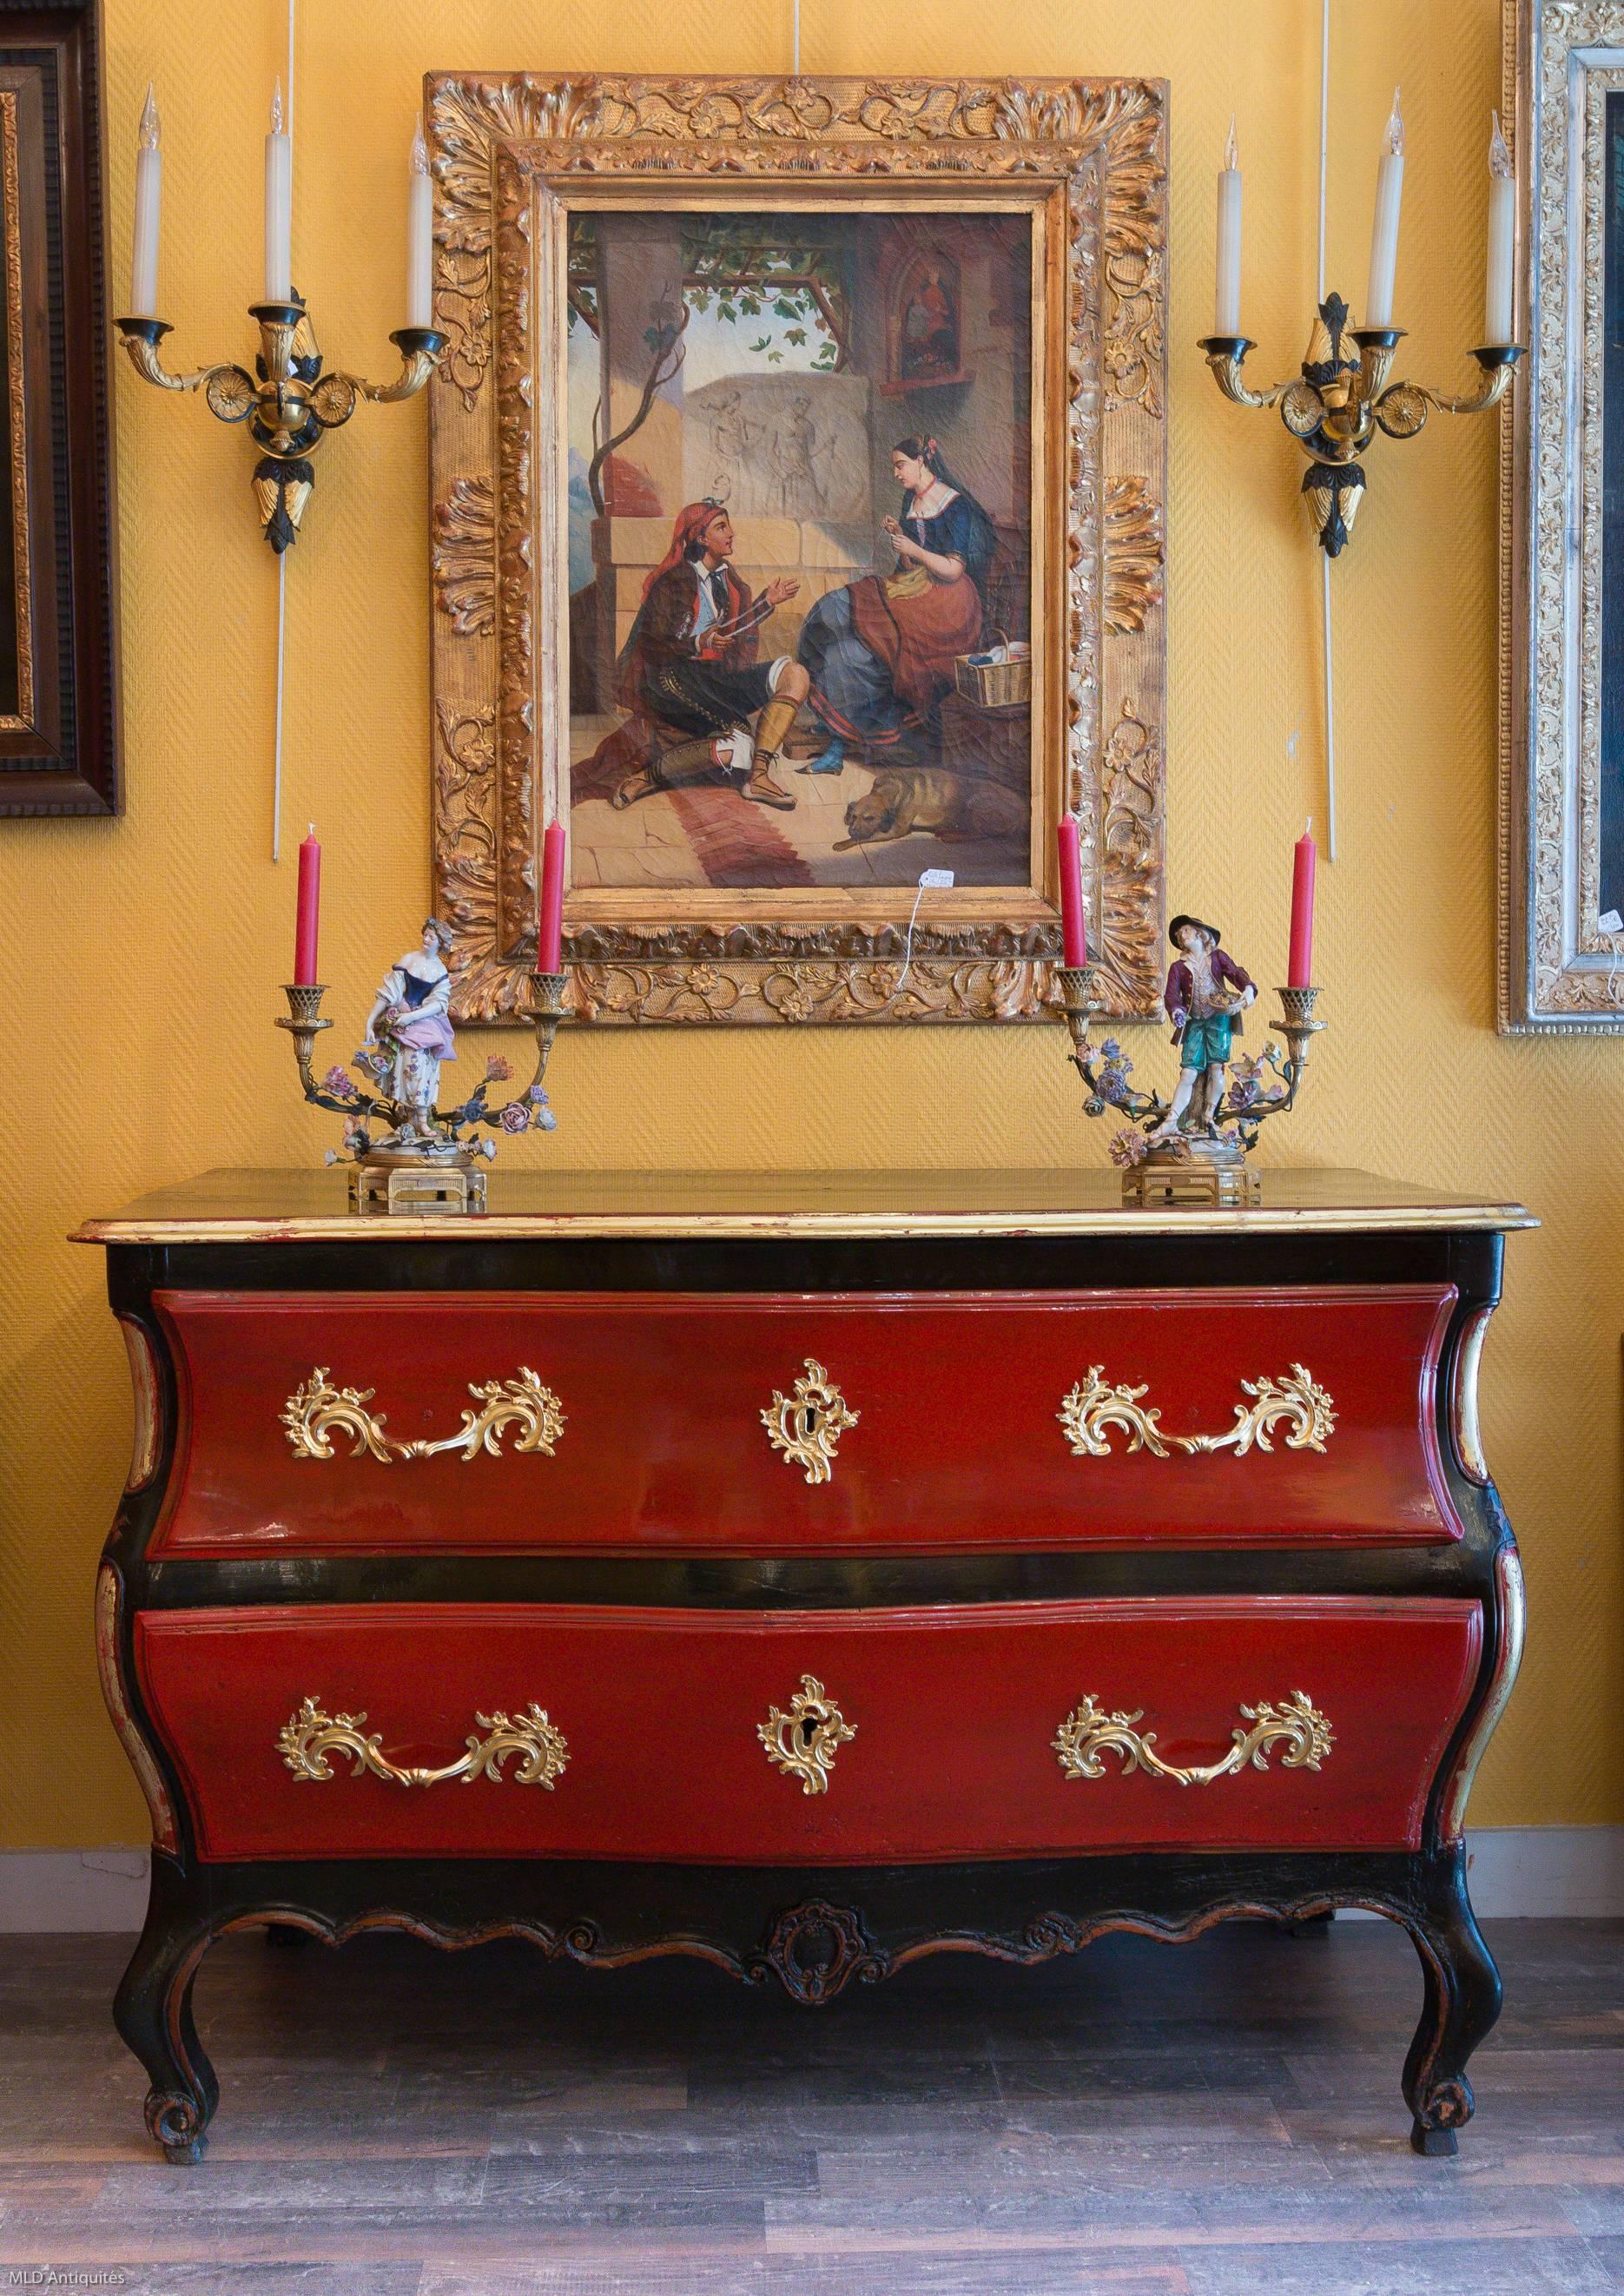 We are pleased to present you, an unusual, beautiful, elegant and rare French Louis XV period, two-drawers in solid walnut black, red and gilt lacquered commode with bombe front and sides, lovely cabriole legs. Original ormolu hardware. 

Our Louis